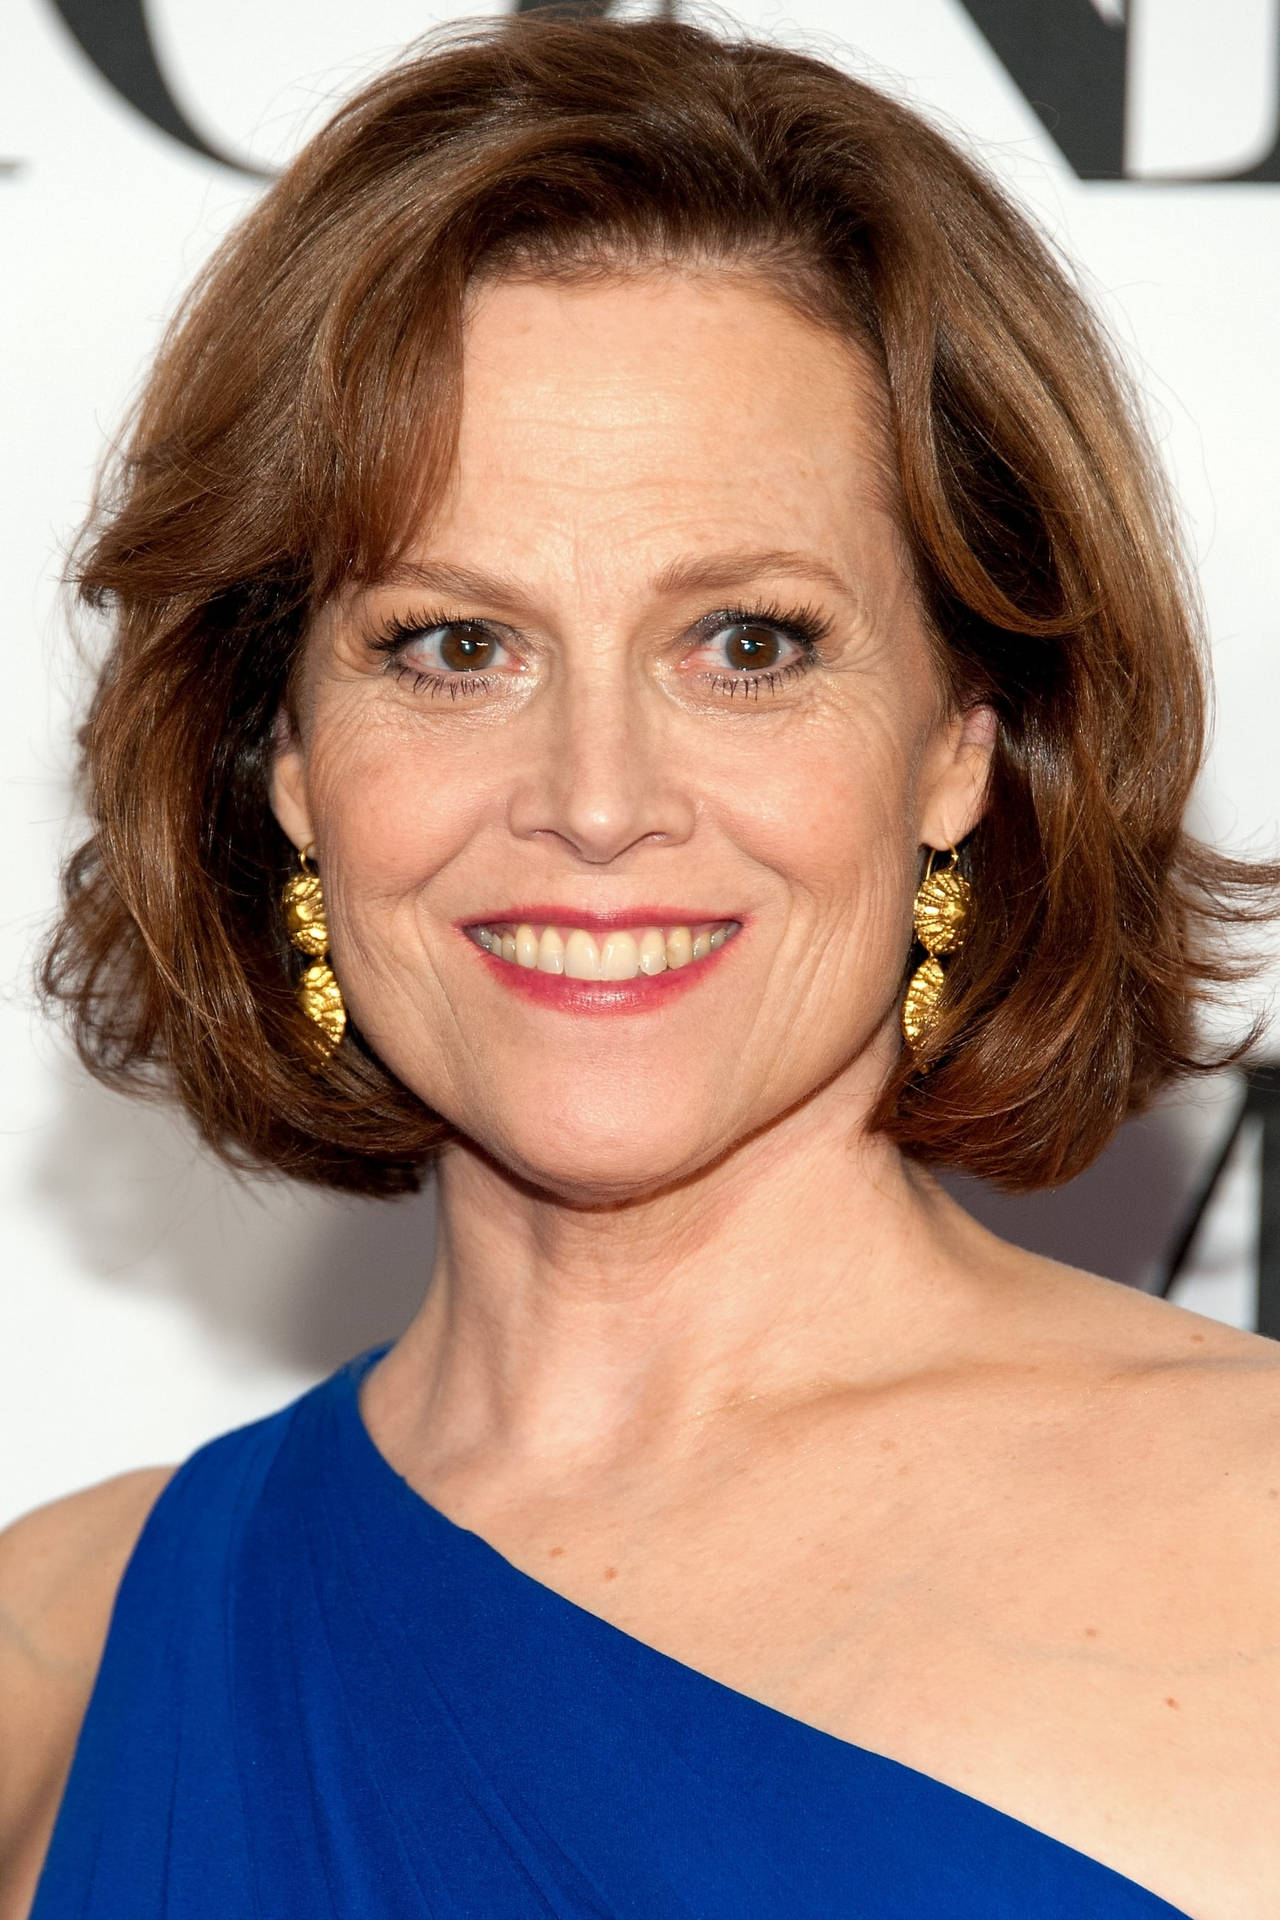 Sigourneyweaver Fashion Week (this Sentence Does Not Make Sense In Context Of Computer Or Mobile Wallpaper And Cannot Be Translated Without Additional Context.) Wallpaper